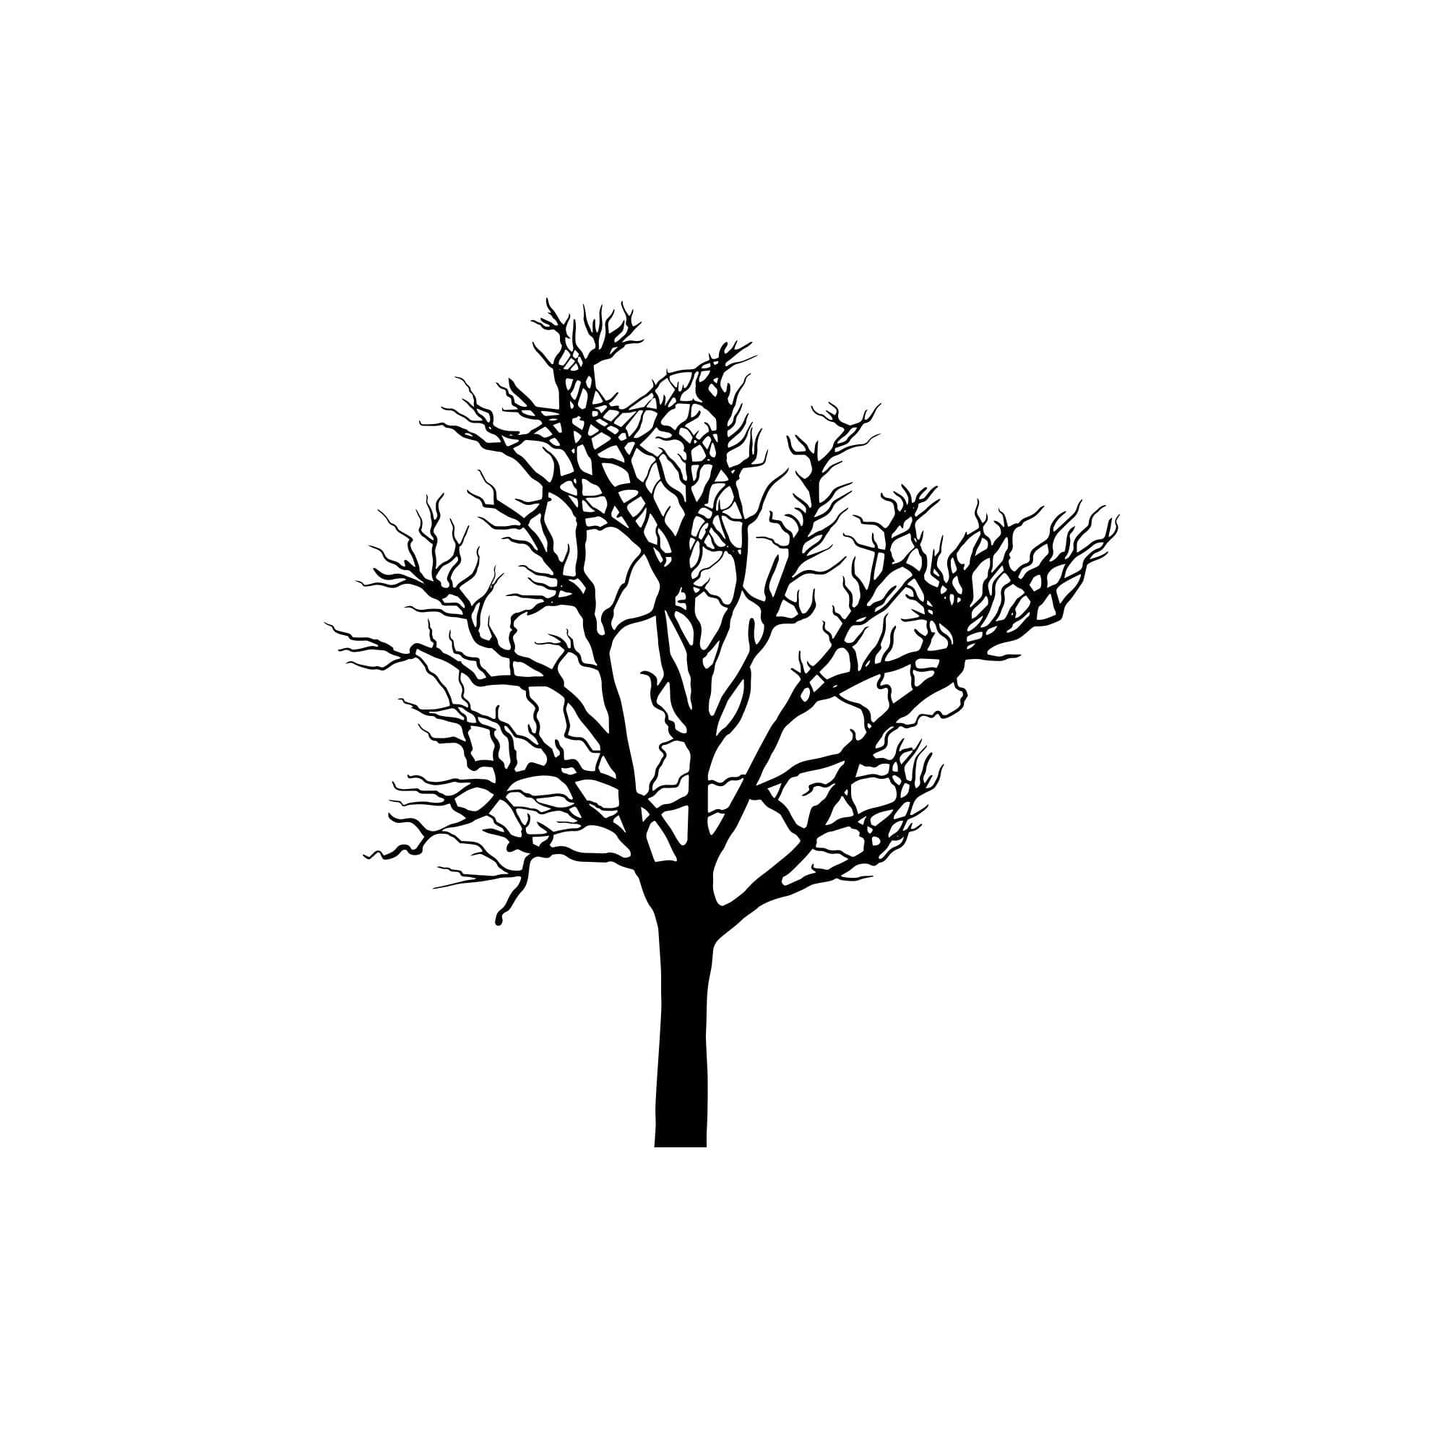 Eerie Bare Tree Vinyl Wall Decal Sticker #OS_MB619